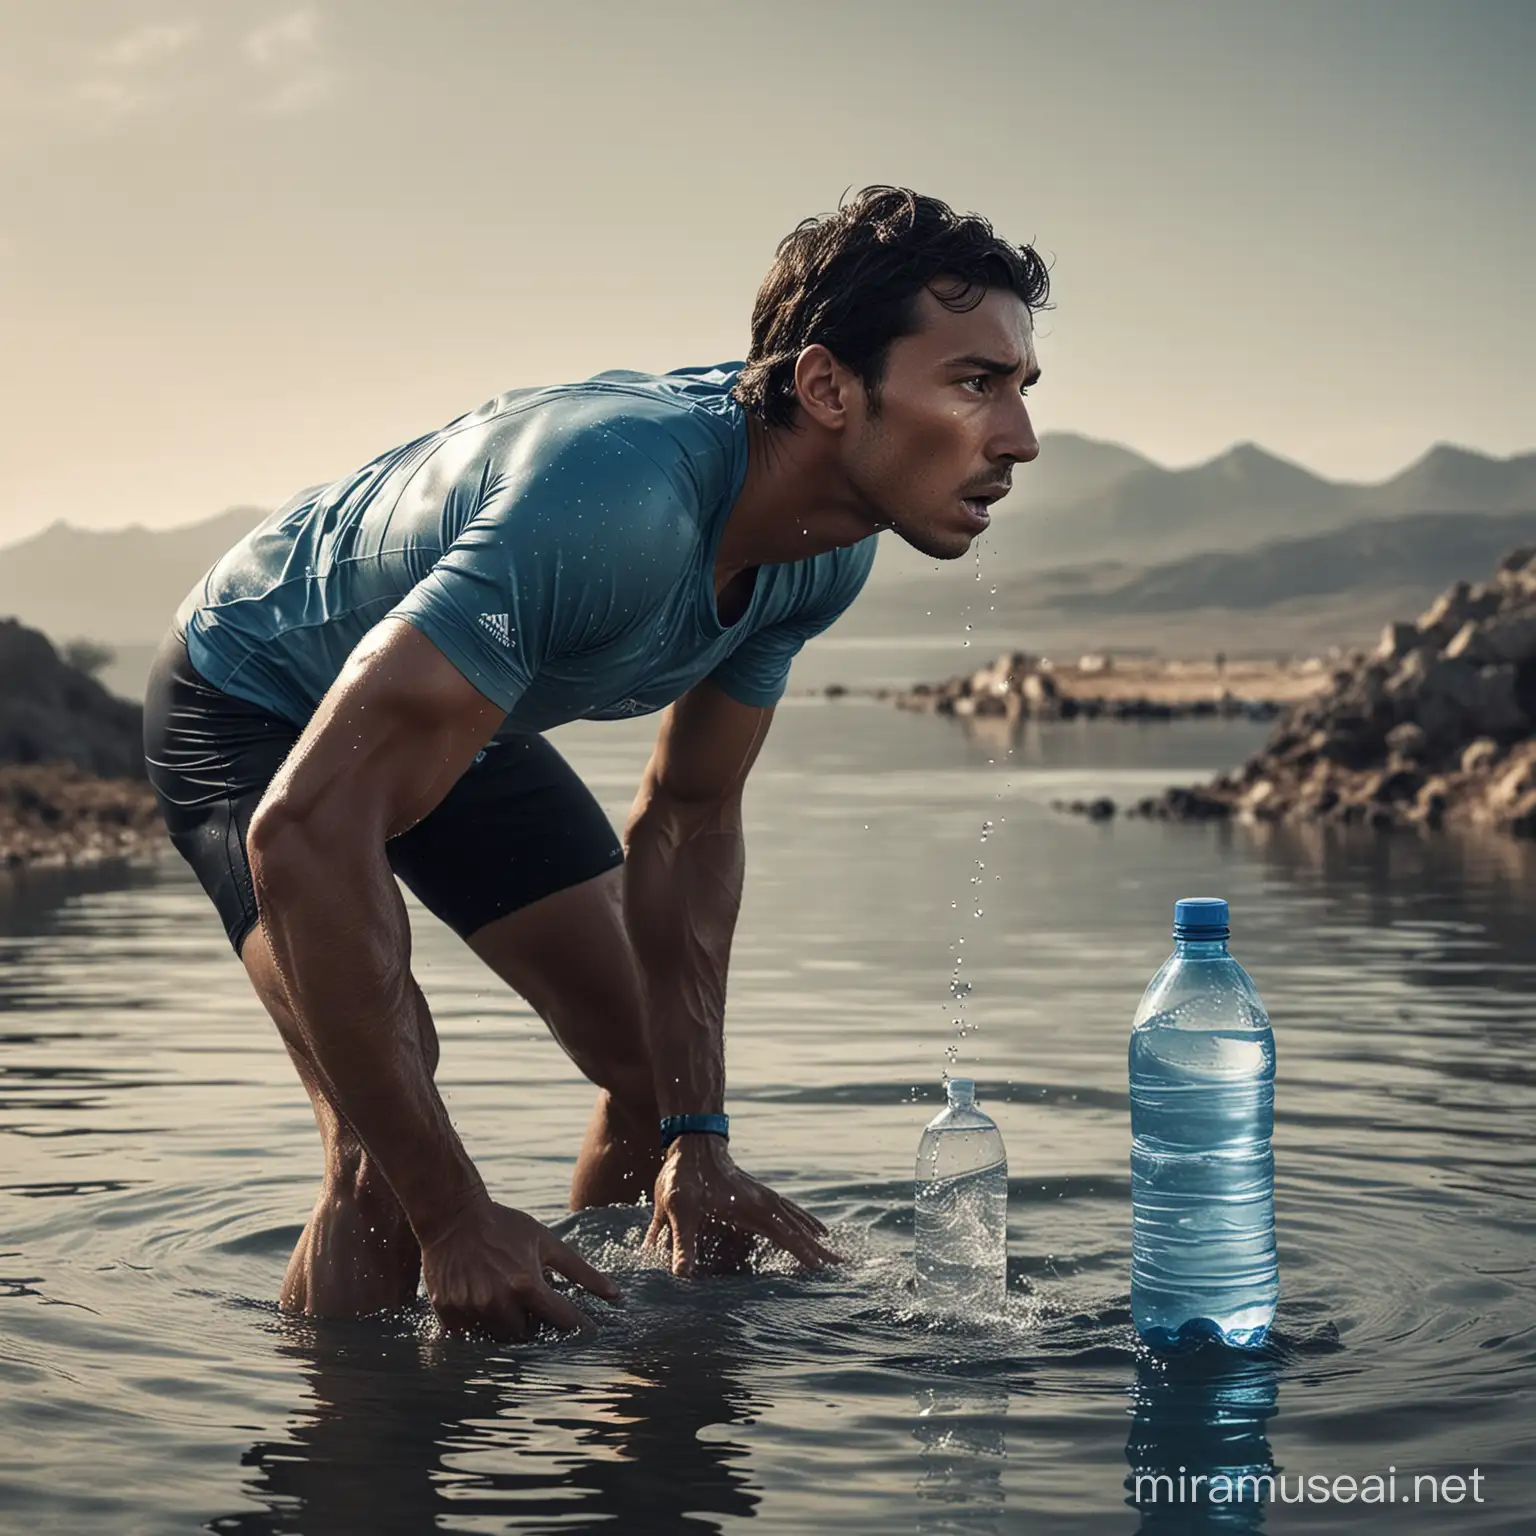 Create an AI-generated image, desperate figure visibly thirsty, hydrated sport athlete, symbolizing the promise of guaranteed access to pure water for all. The scene should evoke a powerful narrative of overcoming adversity and the transformative impact of ensuring water security for everyone. drinking a bottle water